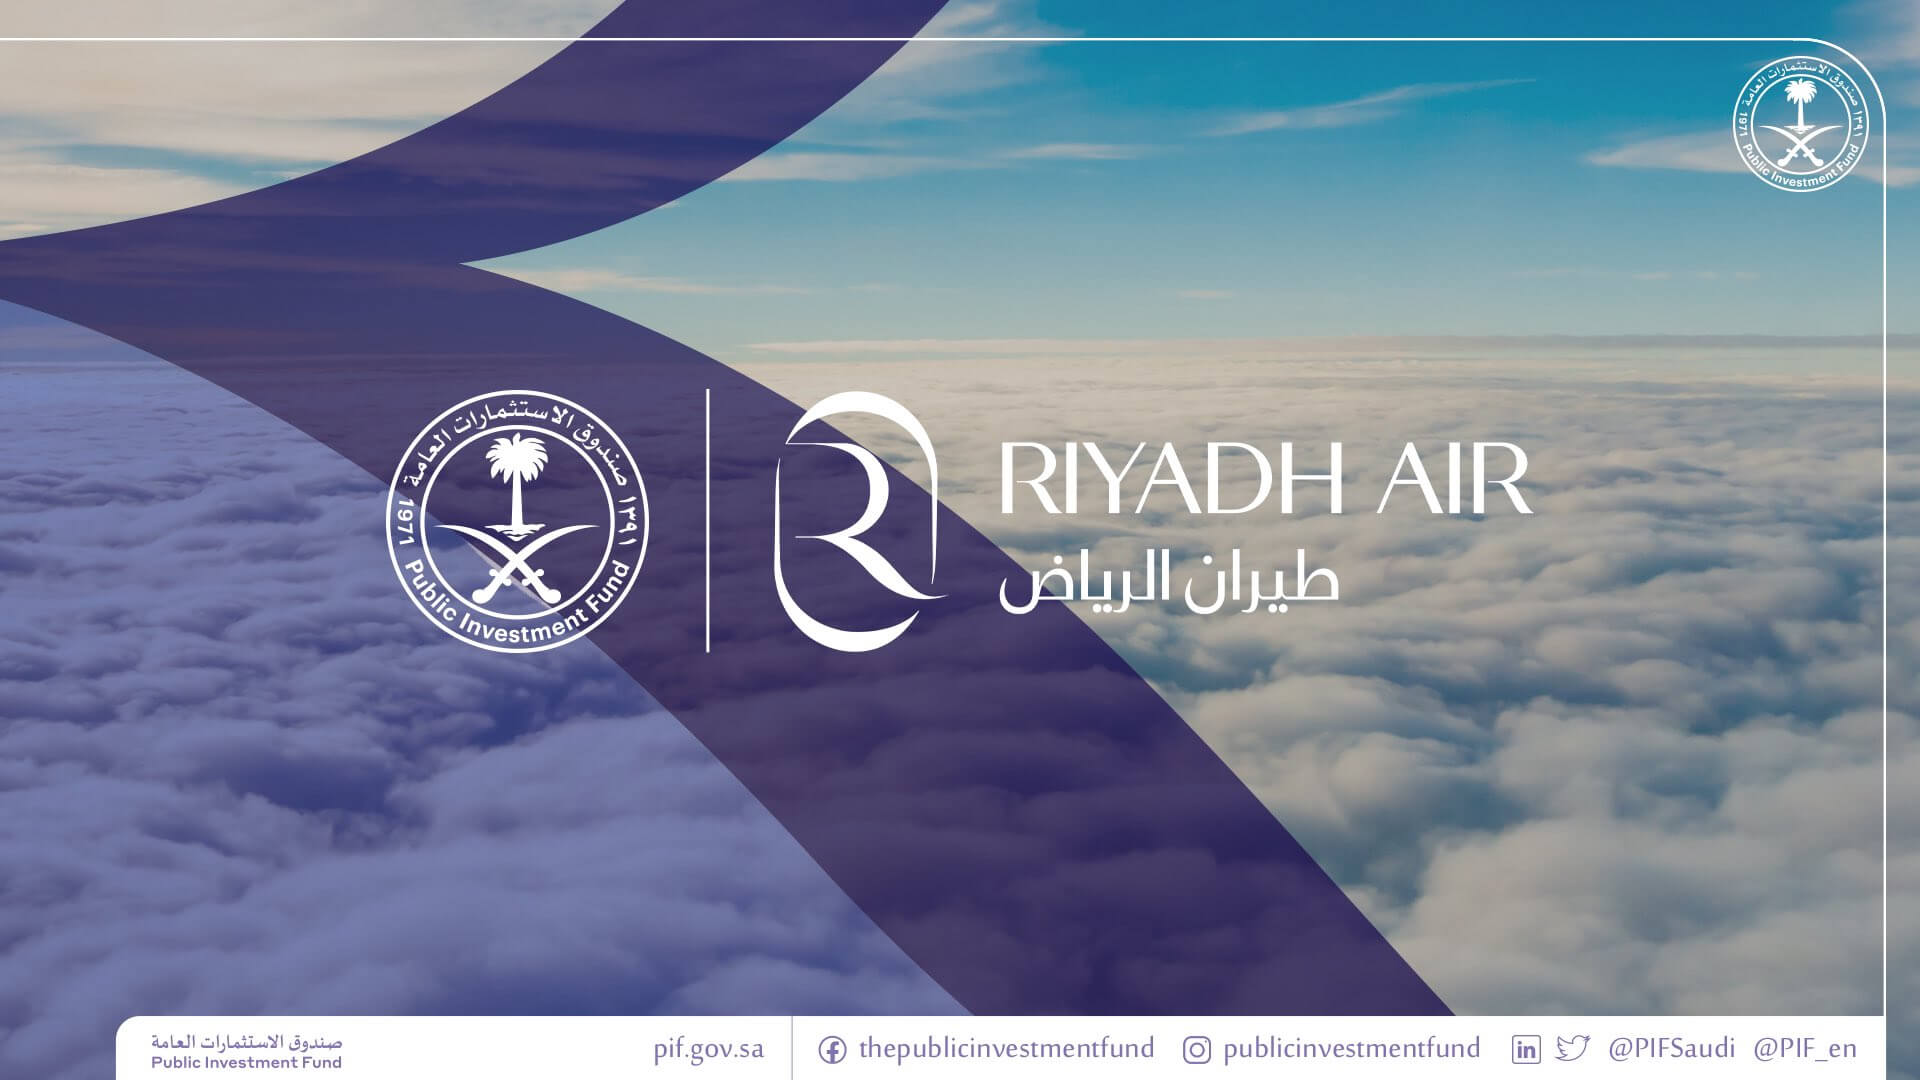 Airline : Riyadh Air is launched with colossal means